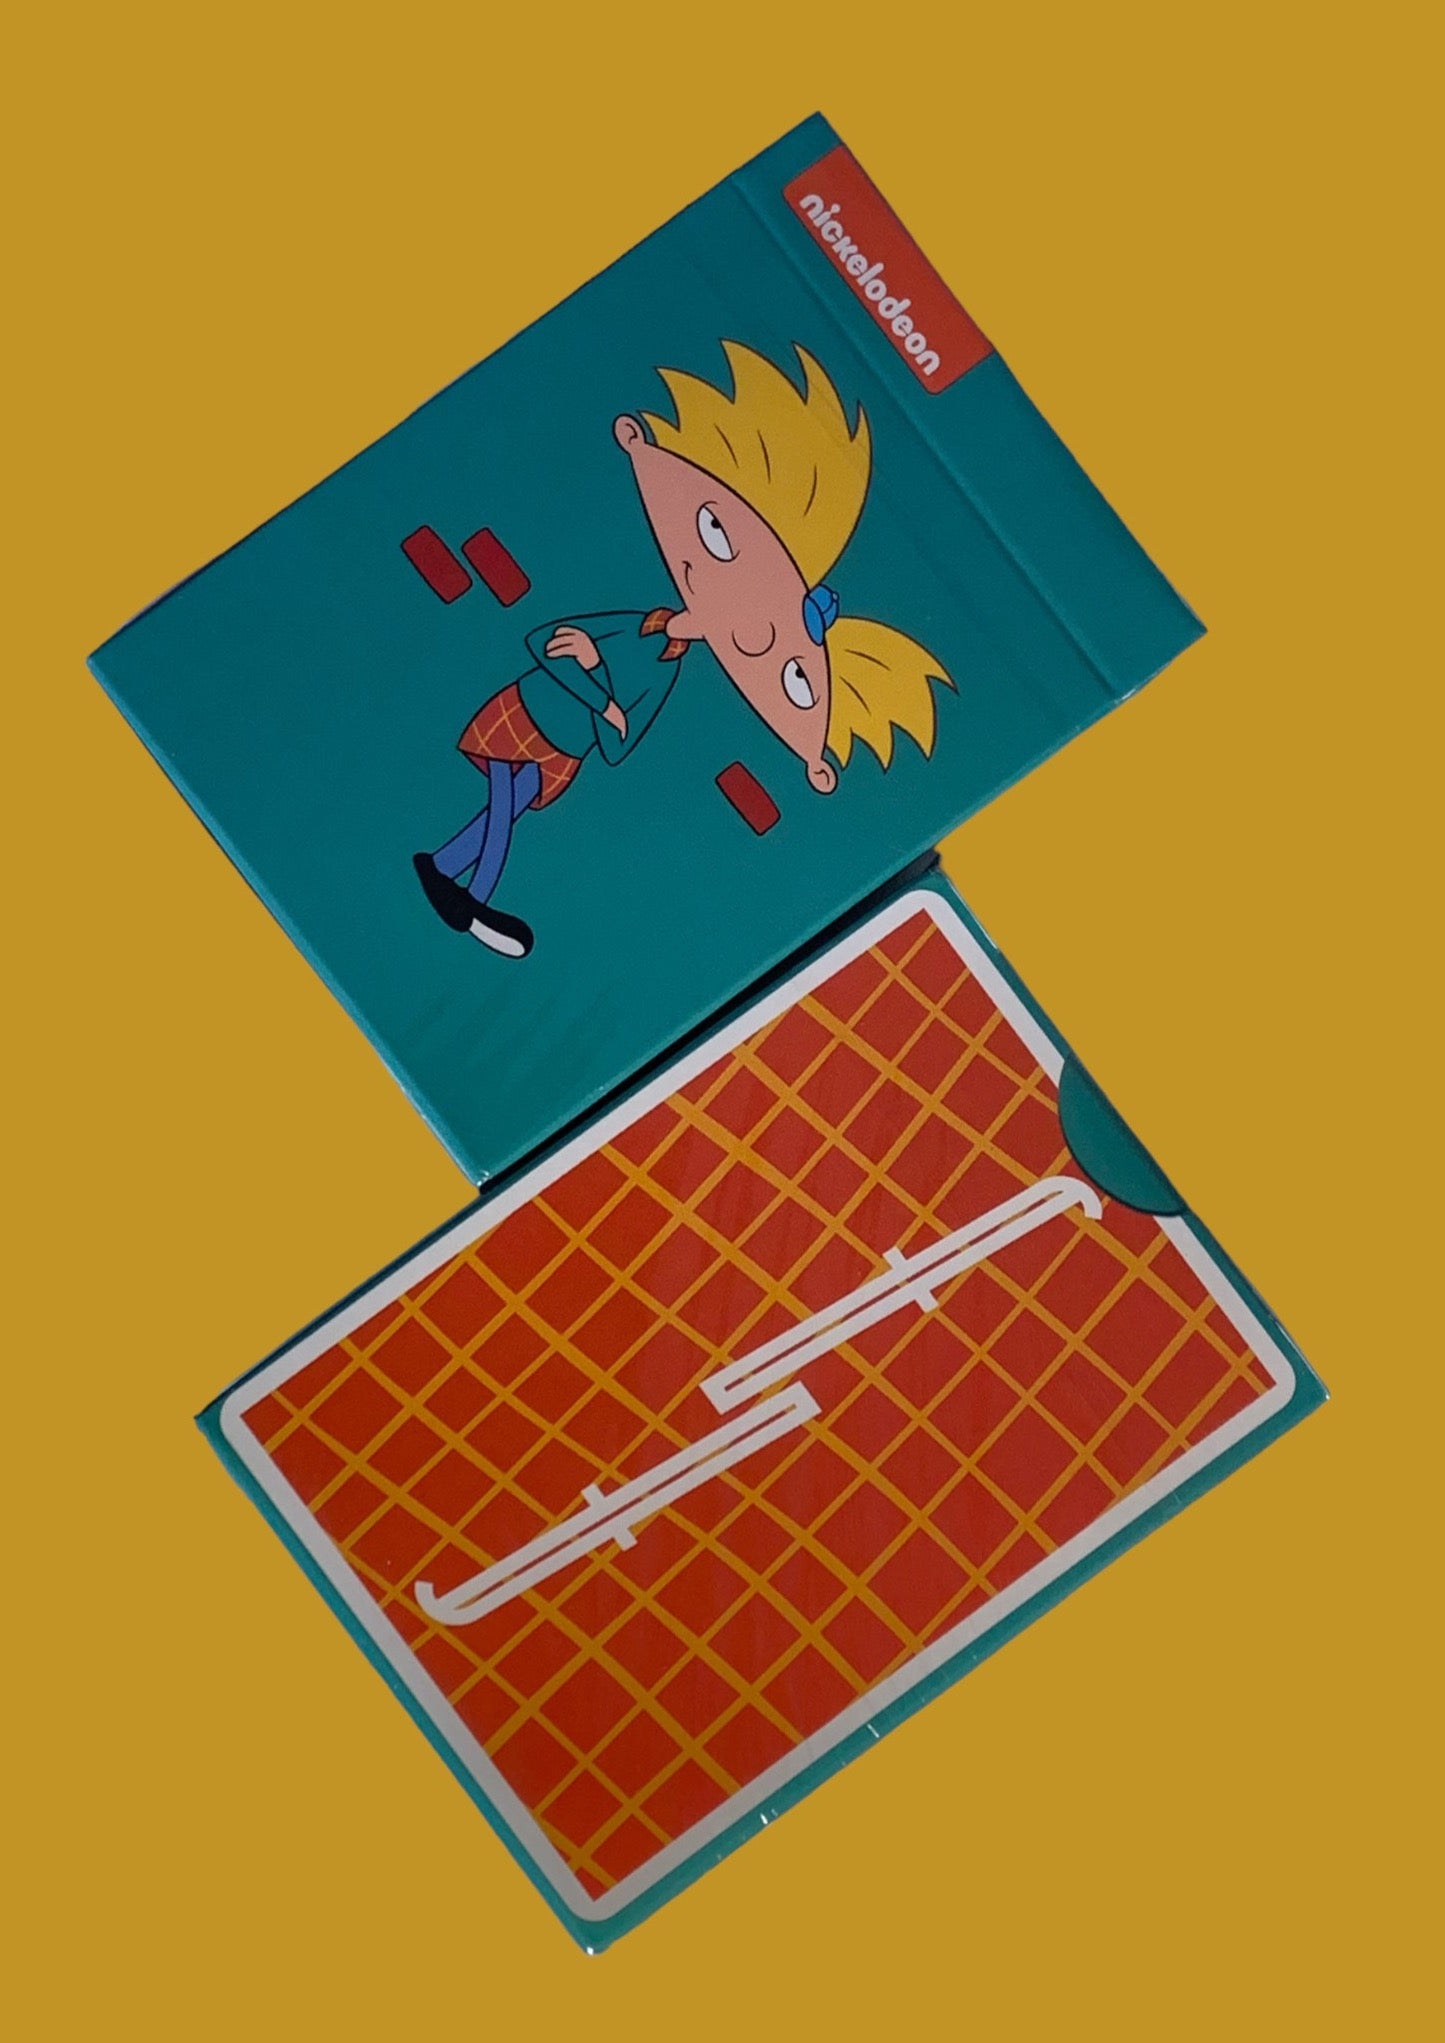 FONTAINE HEY ARNOLD!